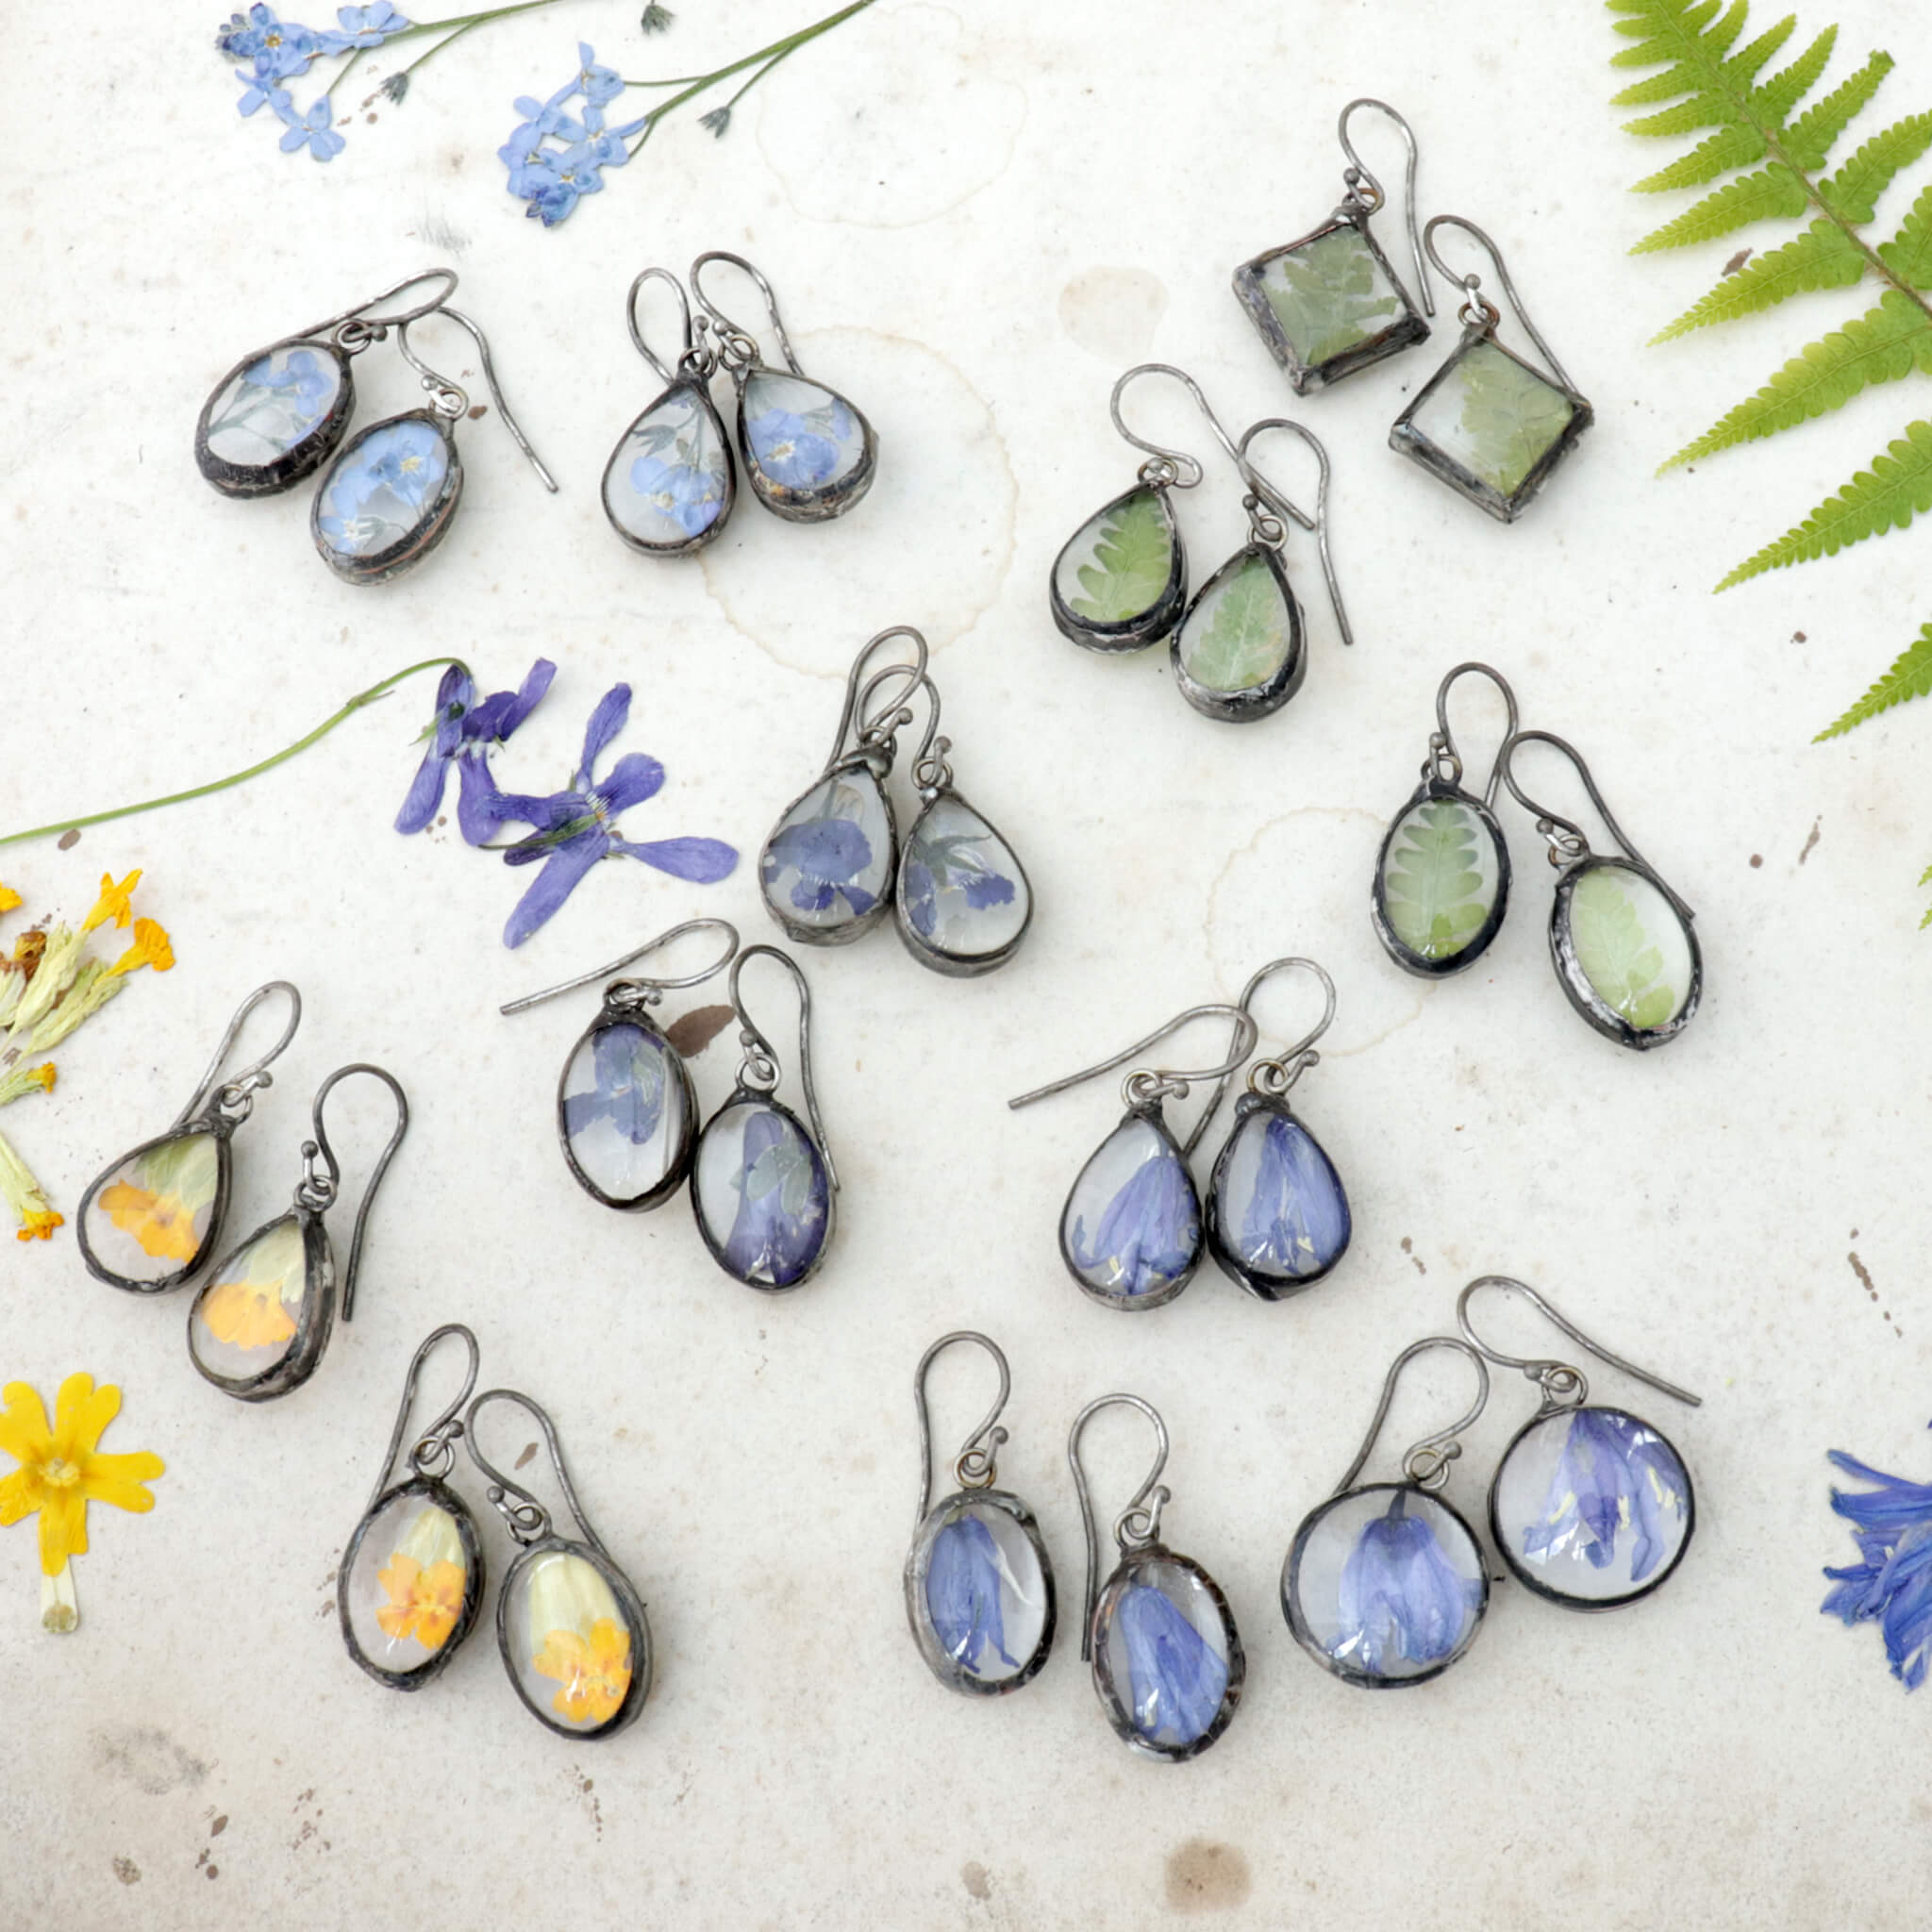 12 sets of colorful earrings with yellow, blue, violet and green flowers and plants